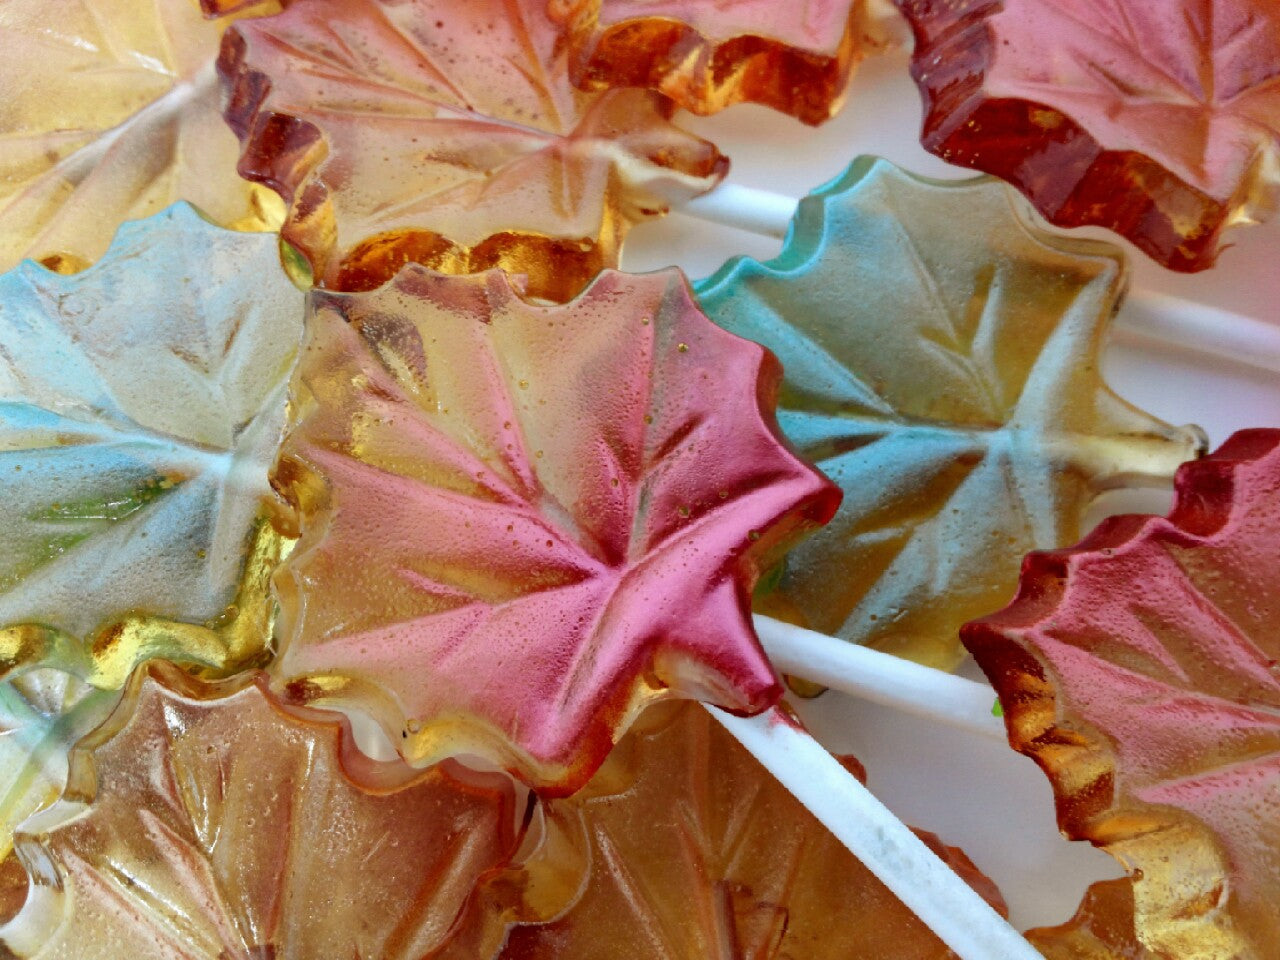 Fall Leaf Lollipops 12-piece set by I Want Candy!